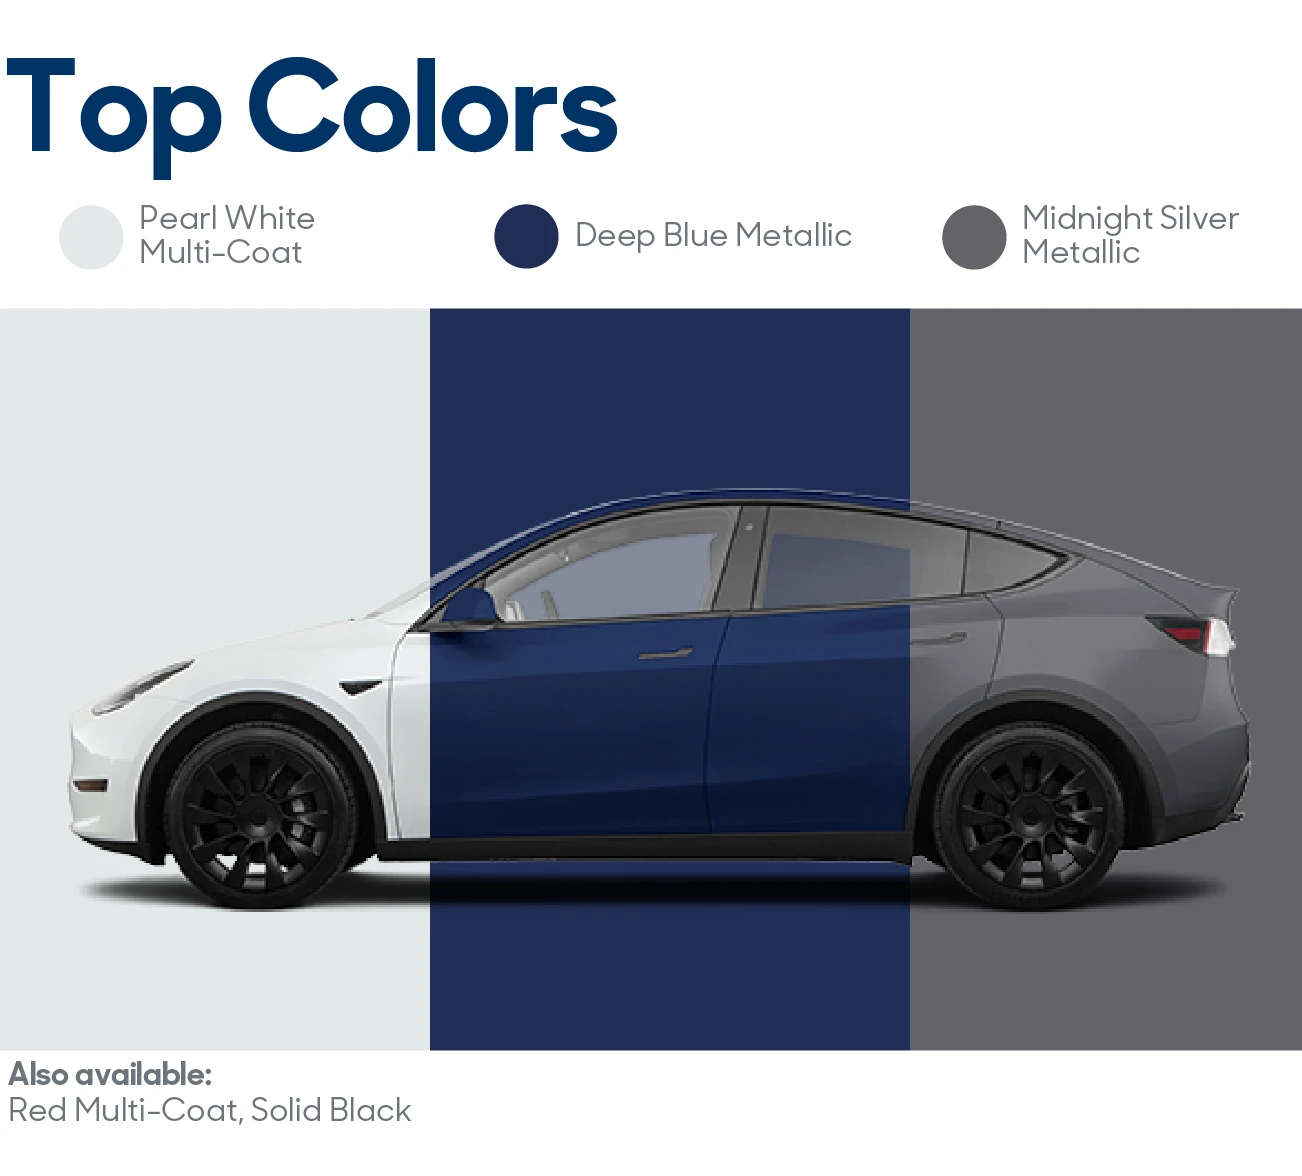 2020 Tesla Model Y Research, photos, specs and expertise